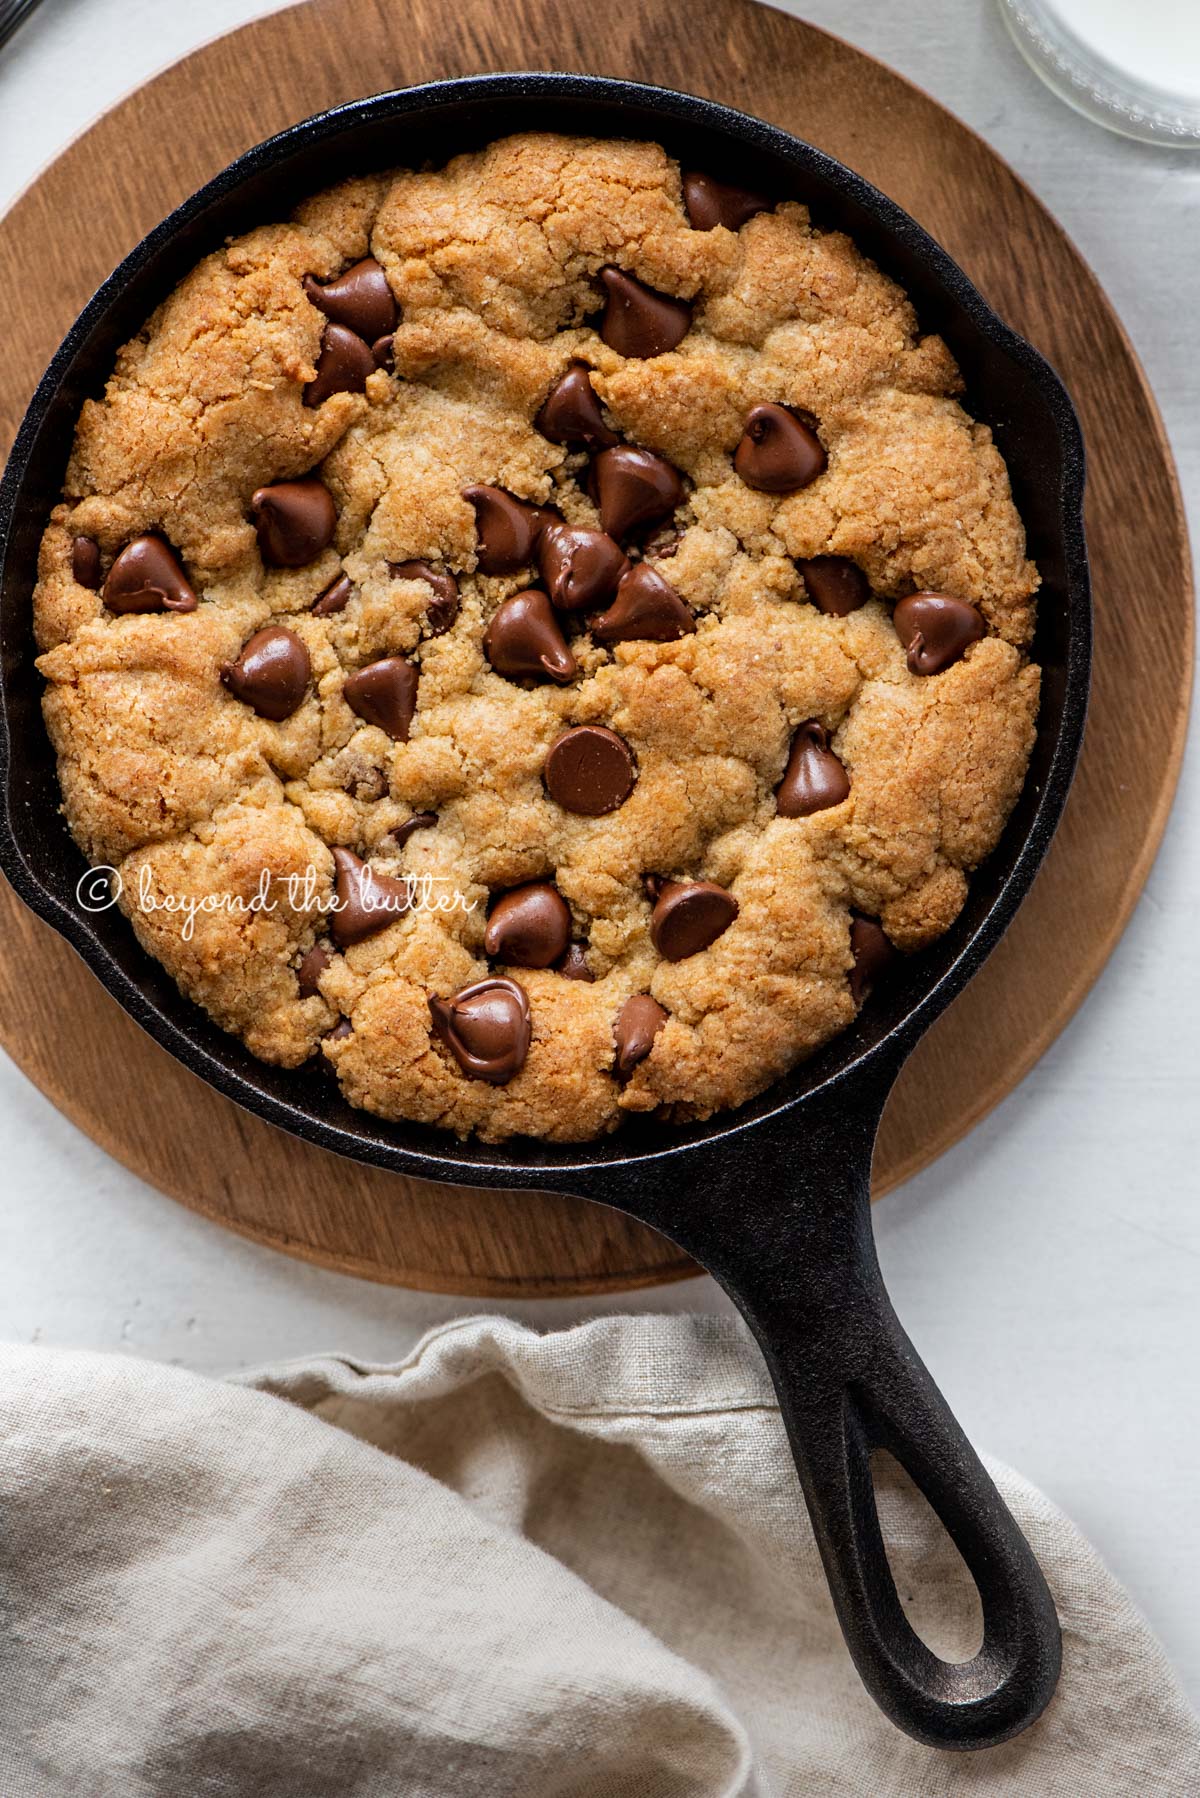 Just baked chocolate chip skillet cookies on light gray background with cloth napkin | All Images © Beyond the Butter®